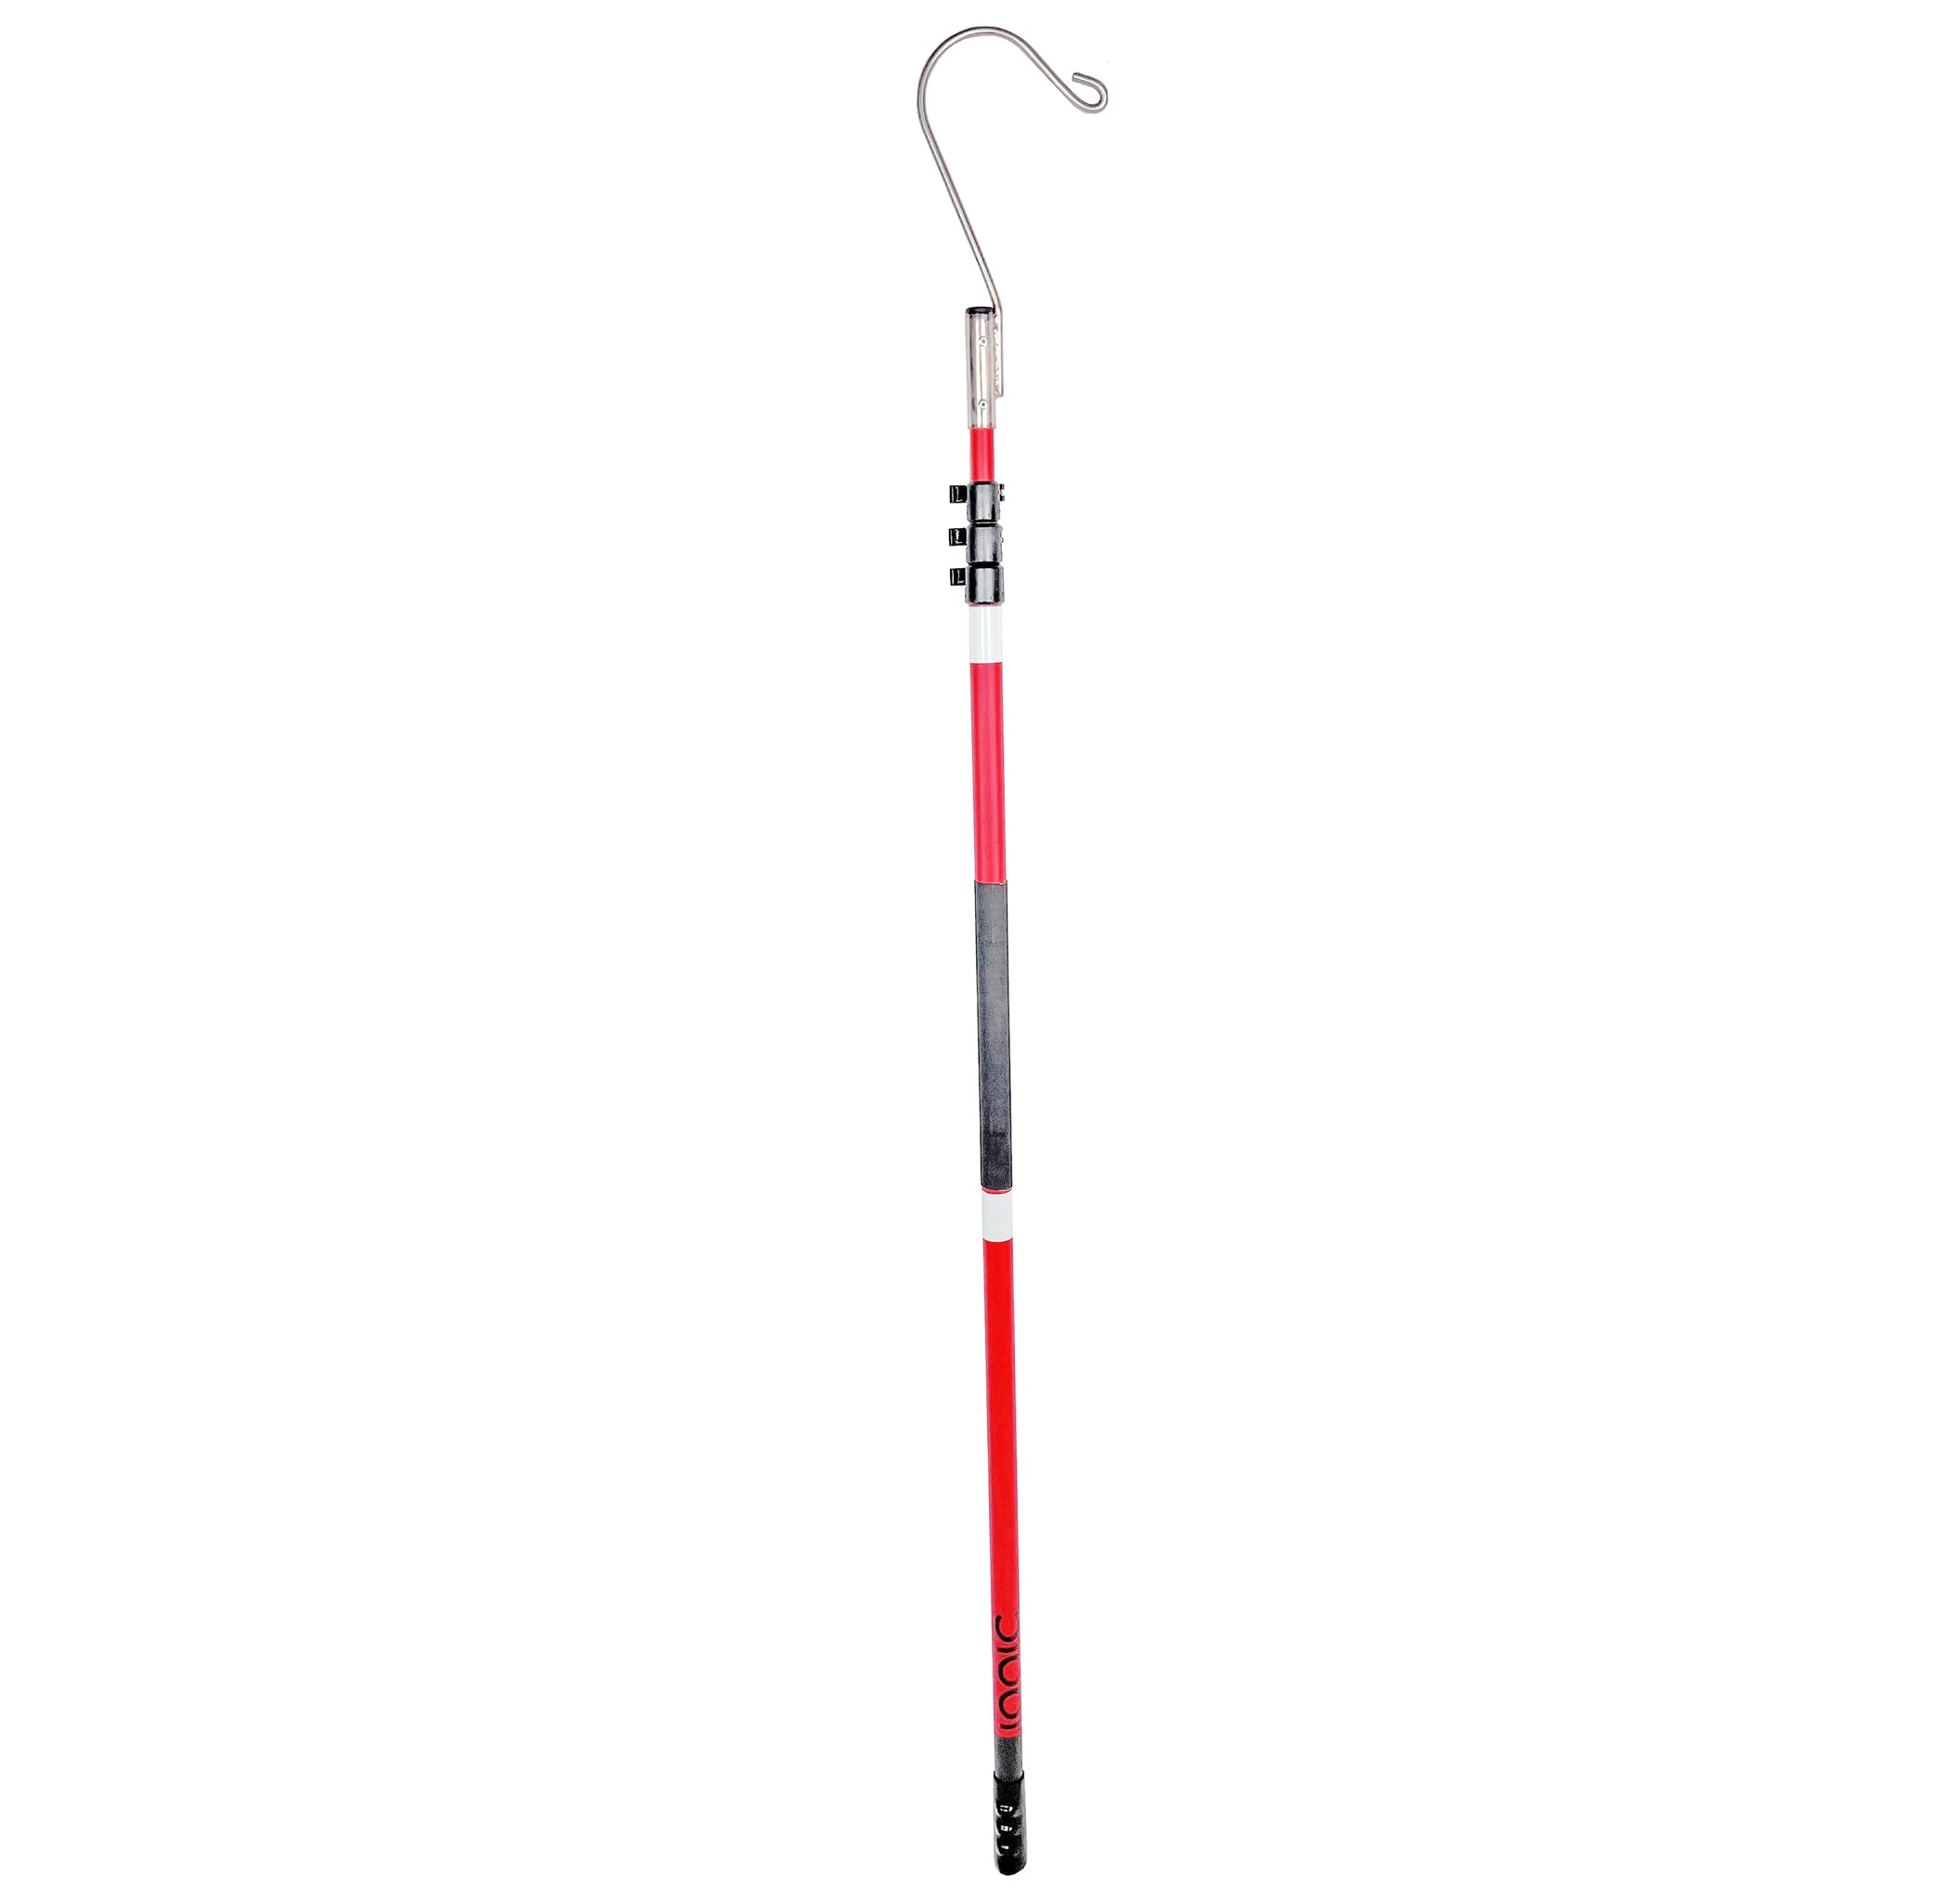 HySafe Hooked Extension Pole - Fast Shipping - Order Today!